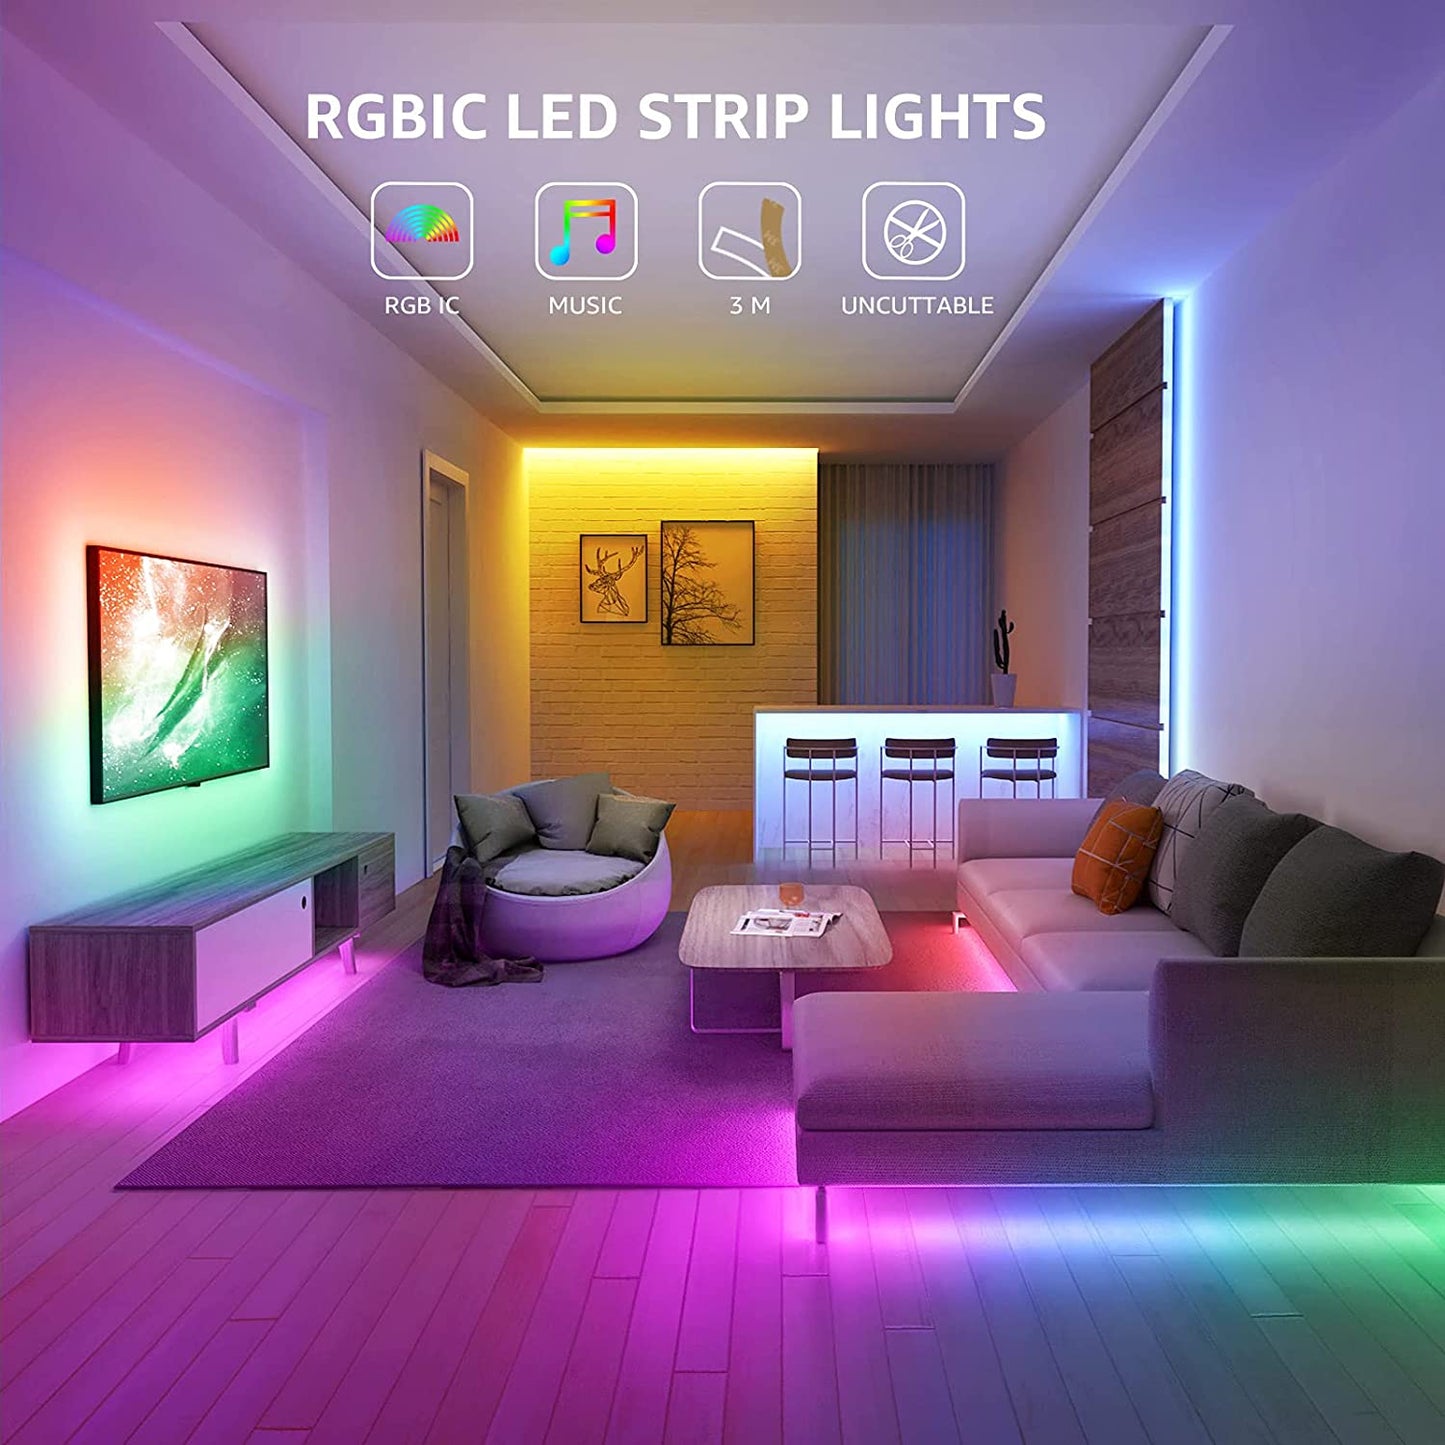 RGB LED Strip Lights, Wi-Fi Remote Control Music-Synced Color Changing for TV Restaurant Bar Club Home Bedroom Party Under Cabinet